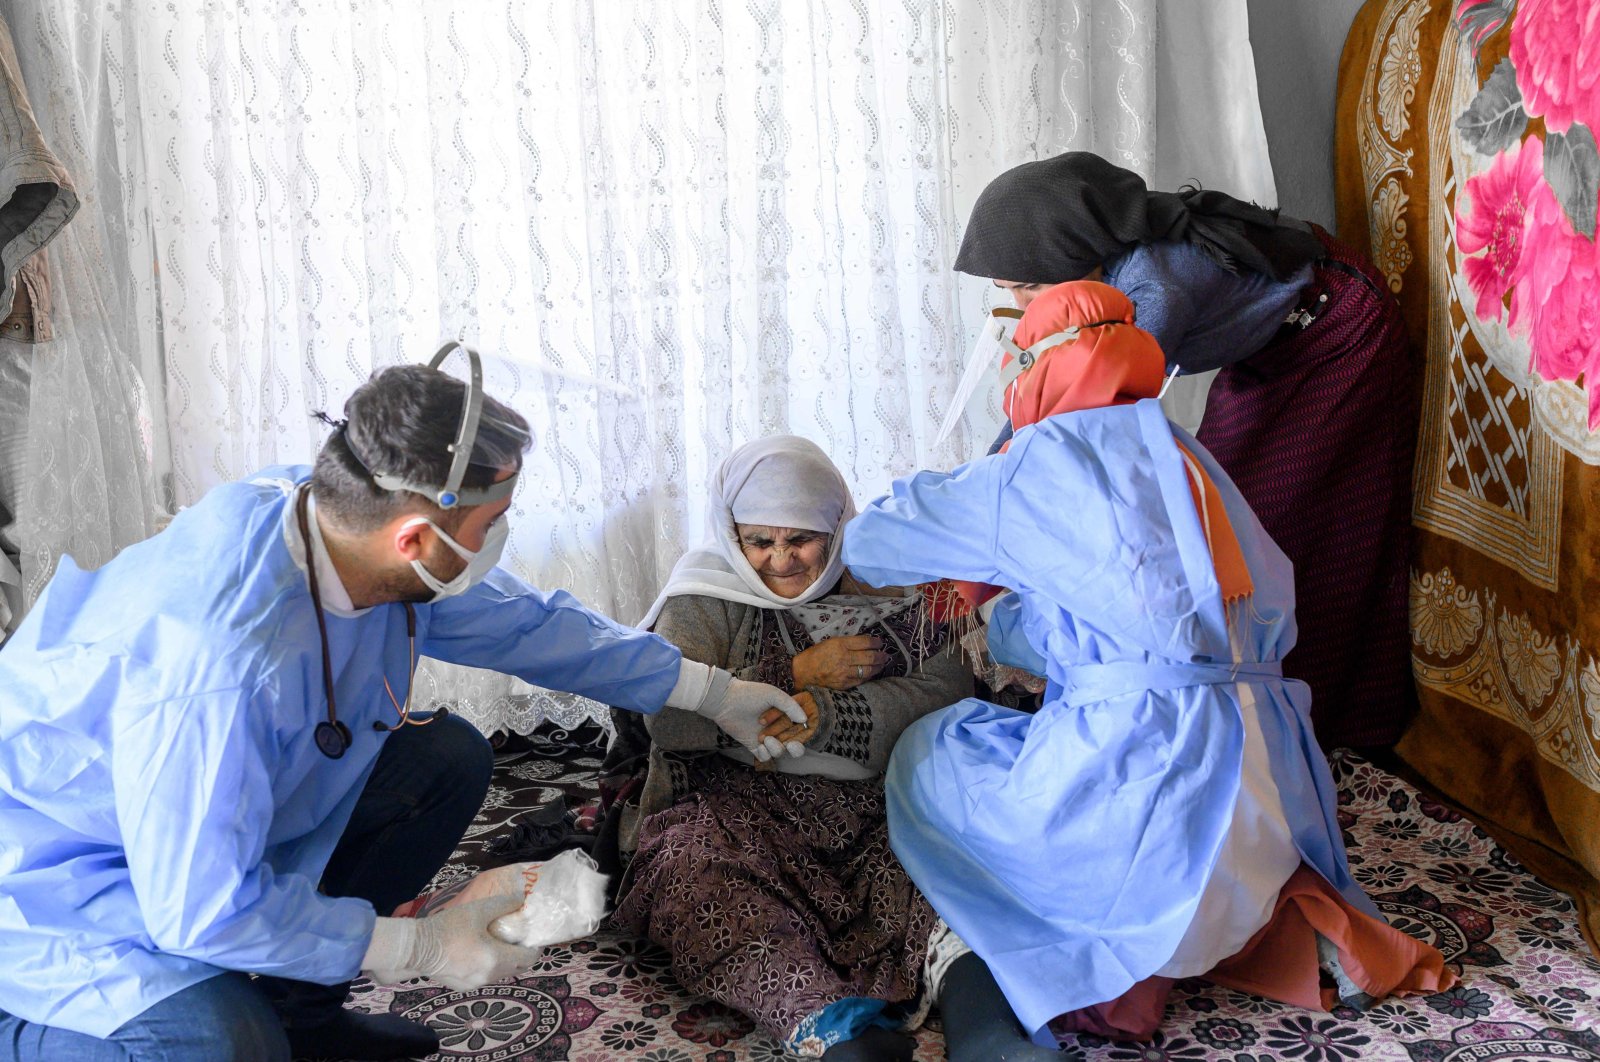 Berfo Arsakay (C), 101 years old, receives a vaccine from nurse Yıldız Ayten (R) from the Bahçesaray public hospital vaccination team as part of an effort to vaccinate residents 65 years old or above against COVID-19, in the village of Güneyyamaç in eastern Turkey, Feb 15, 2021. (AFP Photo)